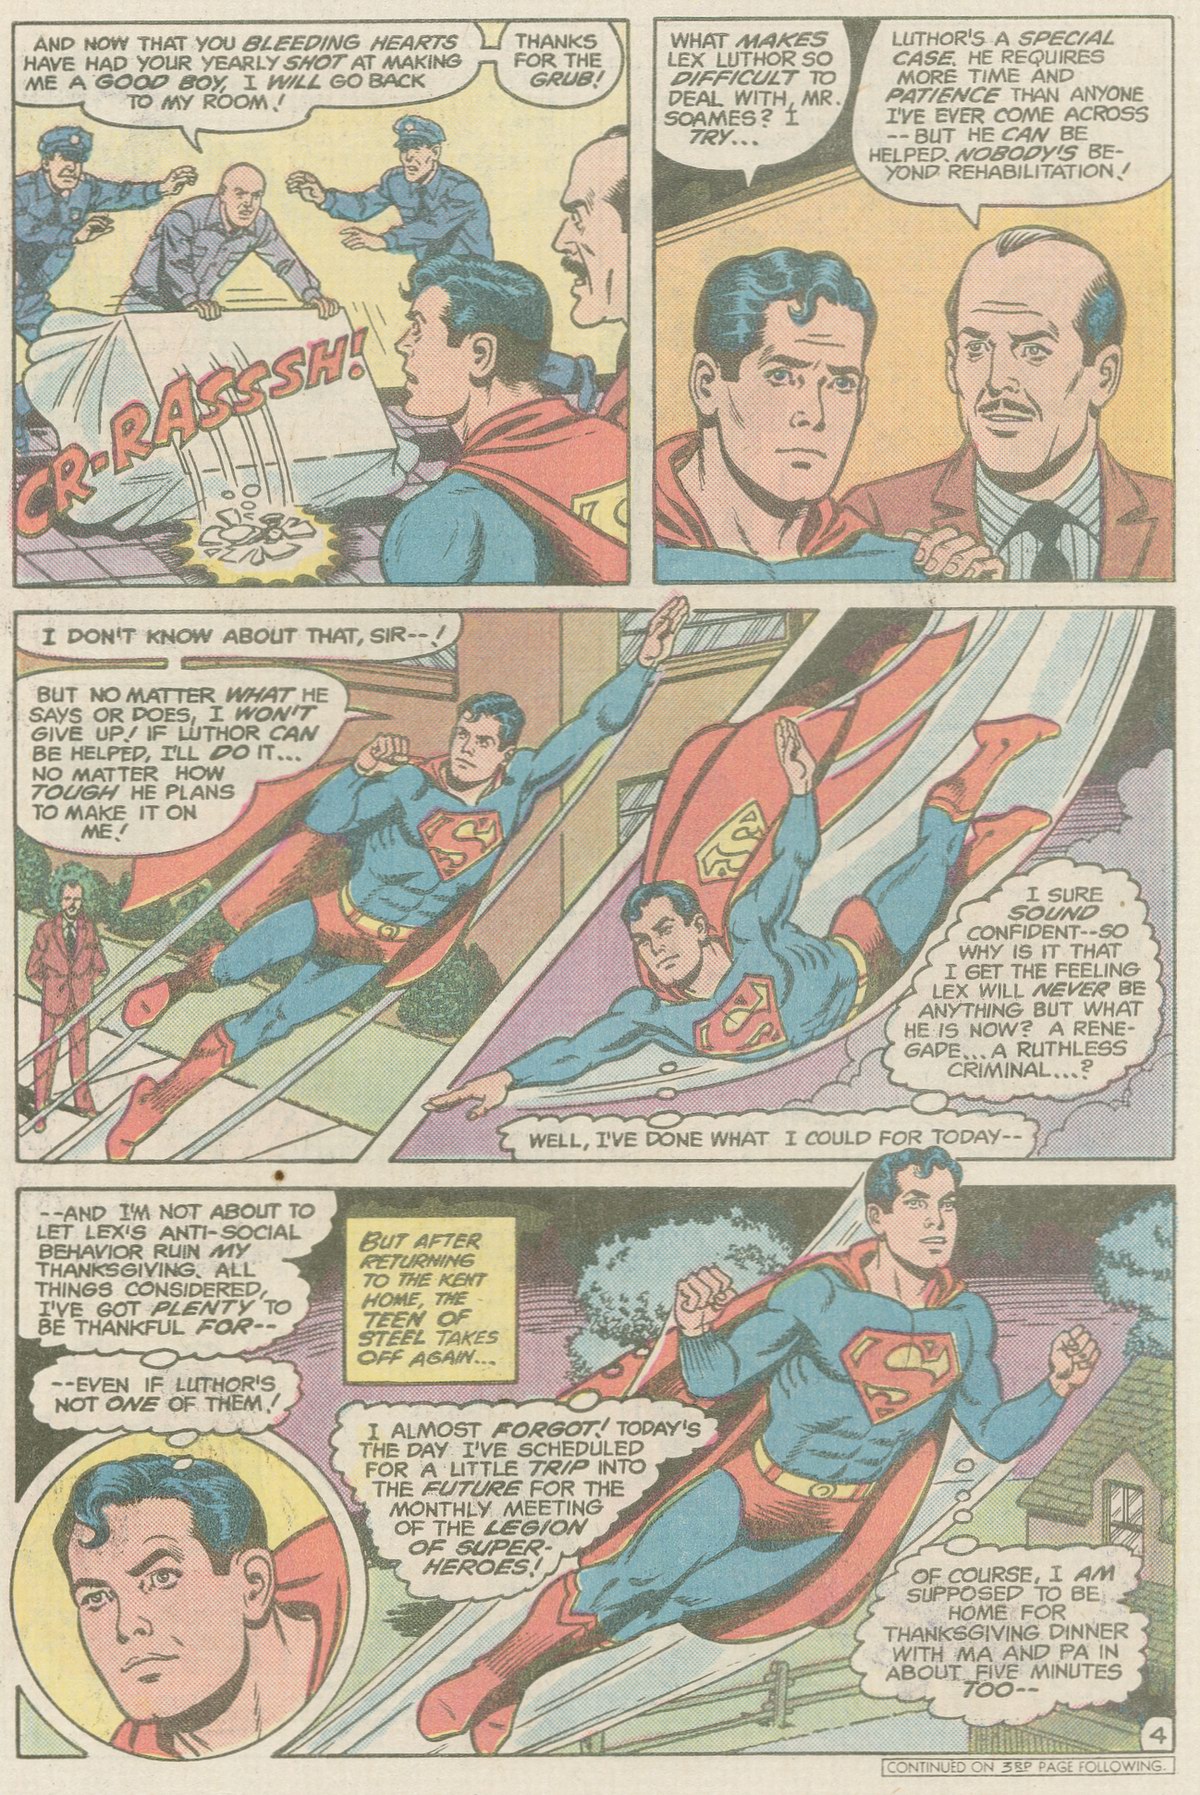 The New Adventures of Superboy 38 Page 4